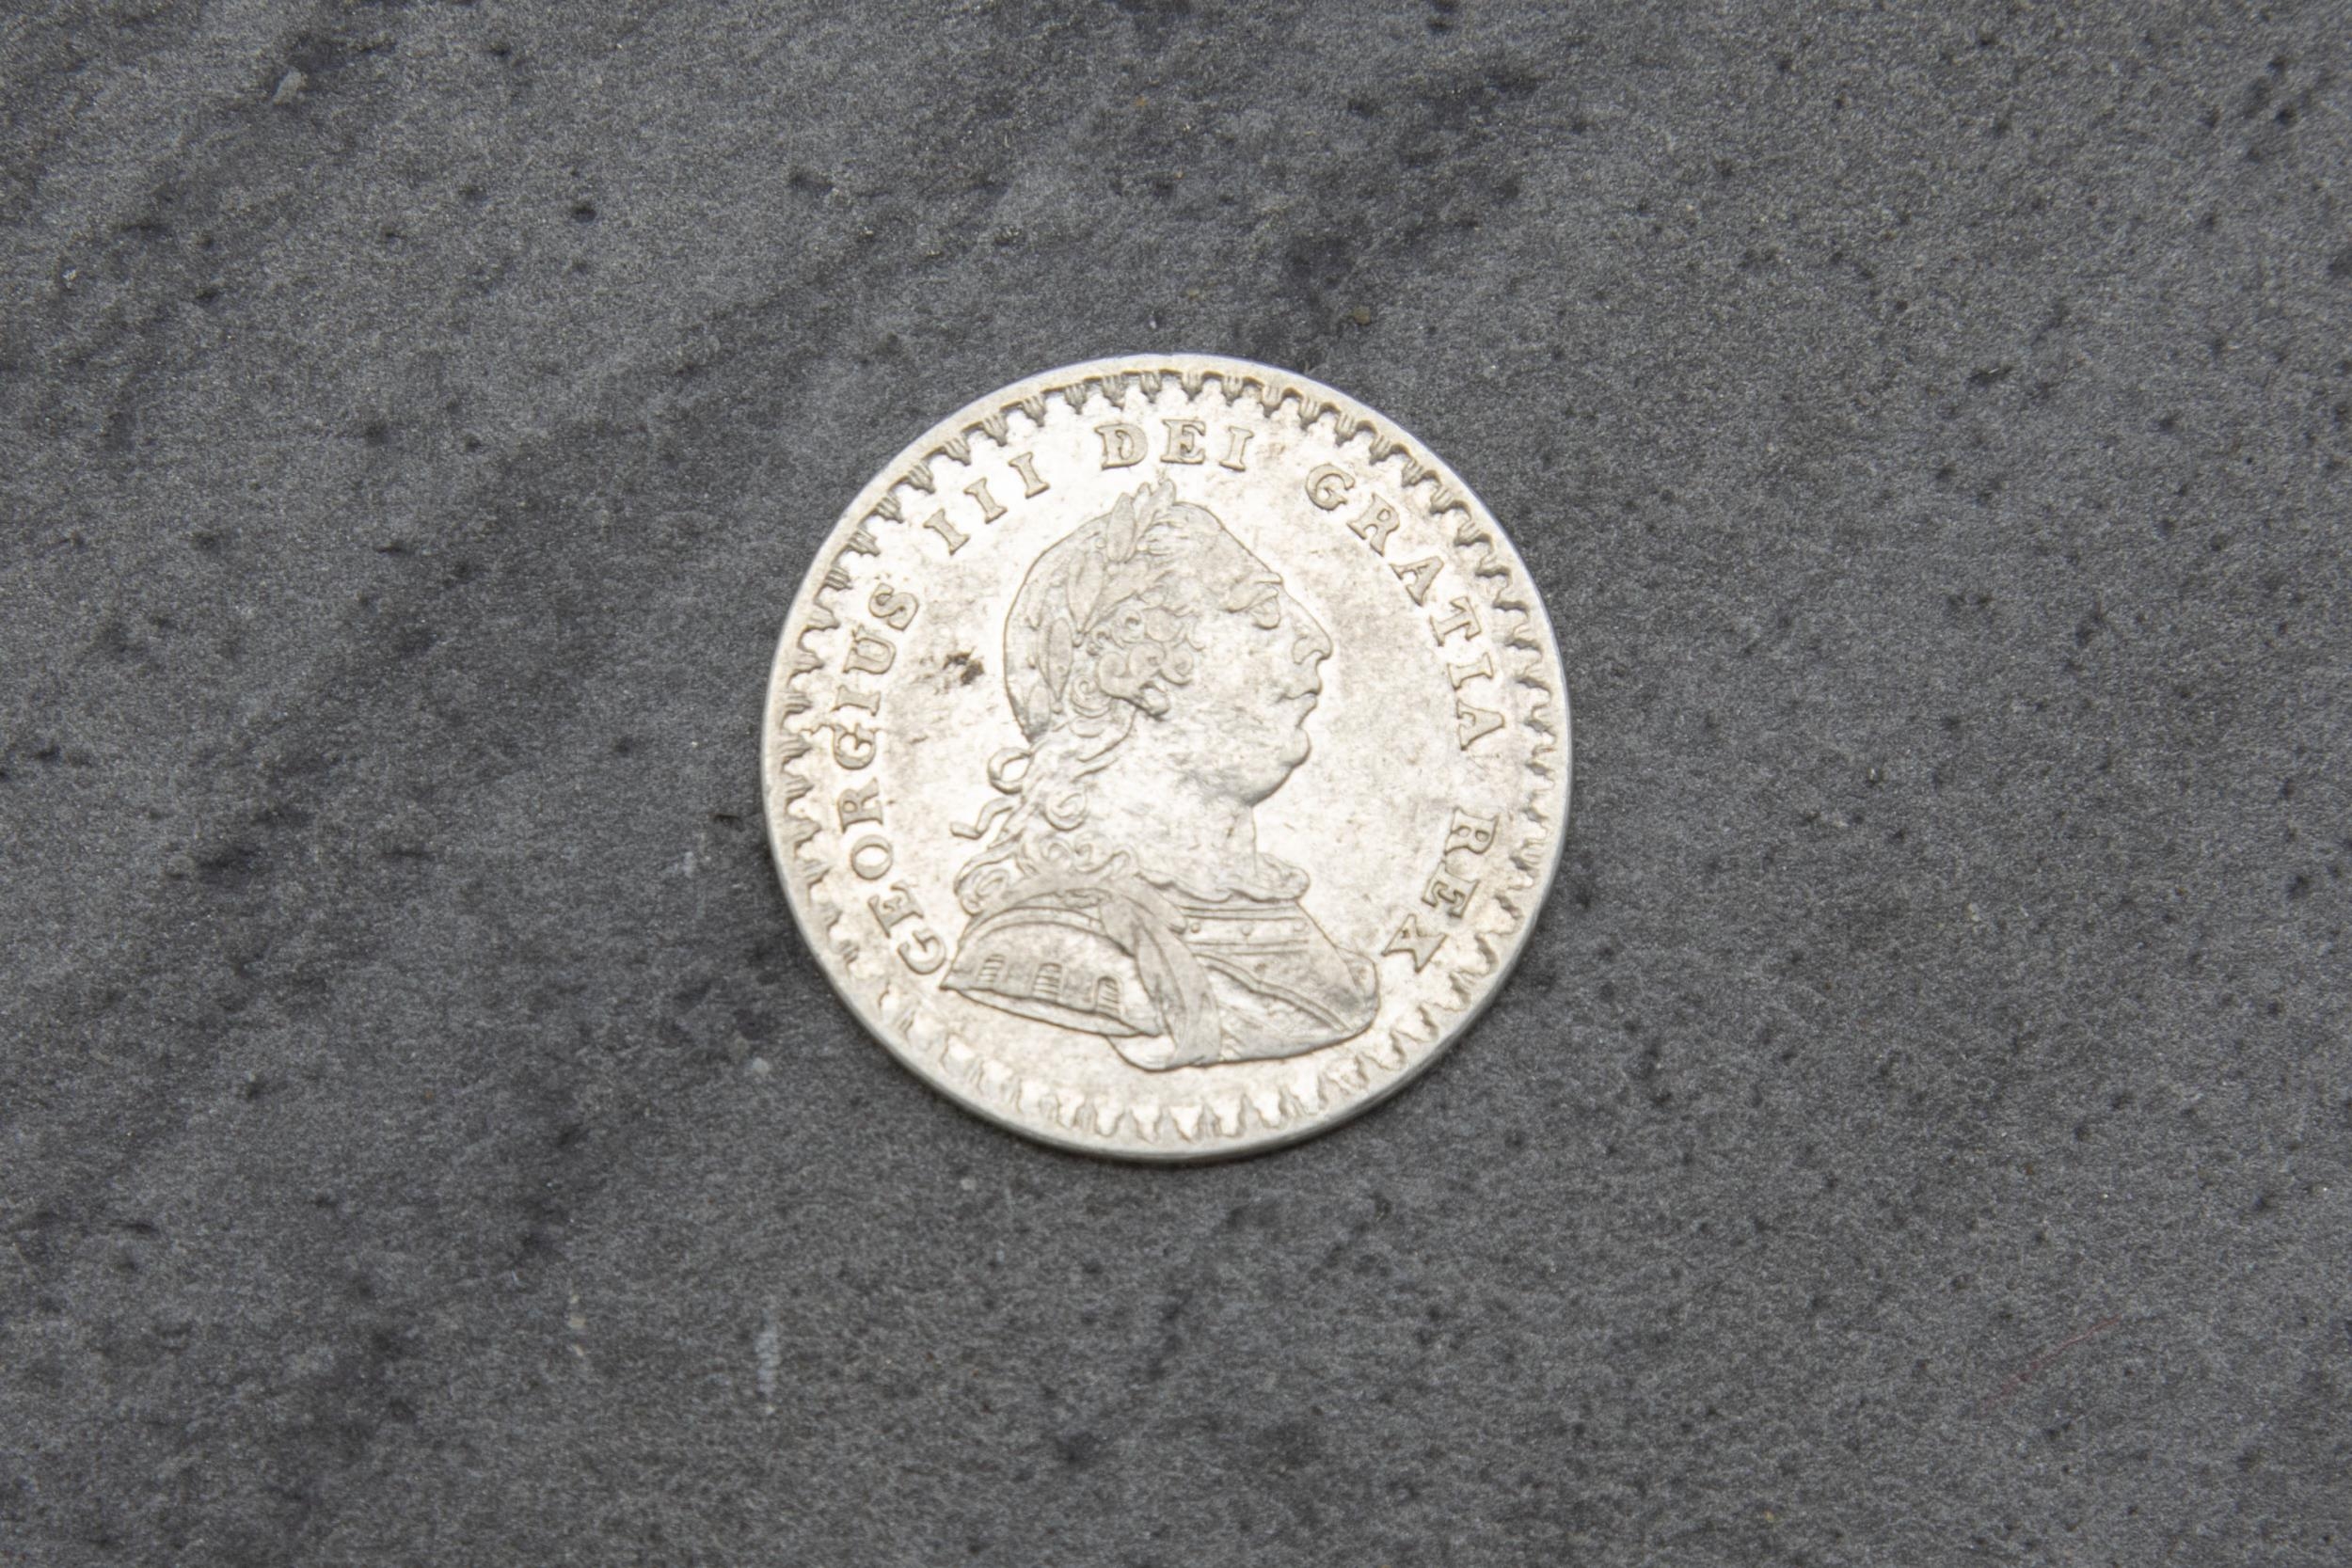 George III silver bank token, 1s 6d (18 pence) coin